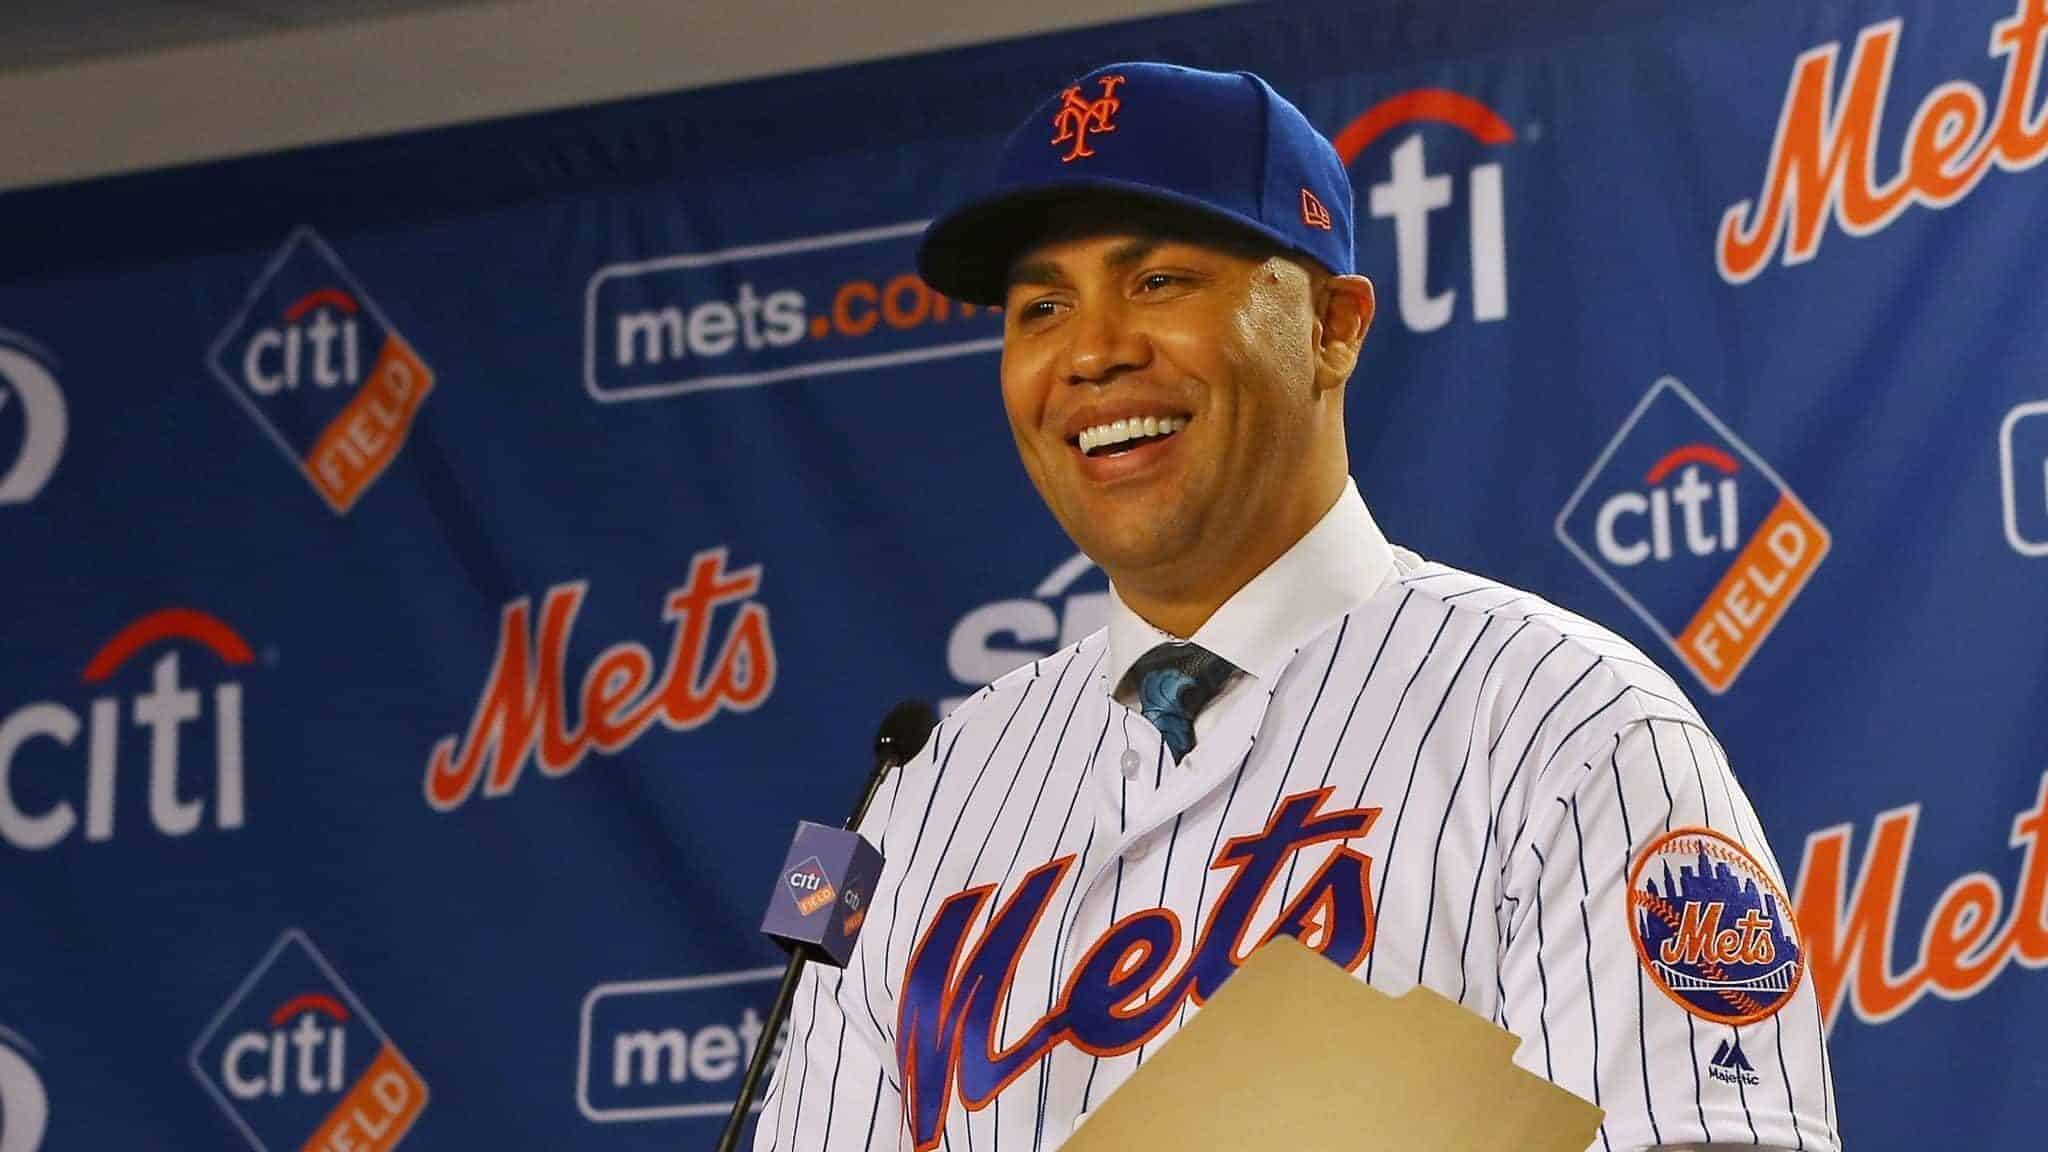 NEW YORK, NY - NOVEMBER 04: Carlos Beltran talks after being introduced as manager of the New York Mets during a press conference at Citi Field on November 4, 2019 in New York City.